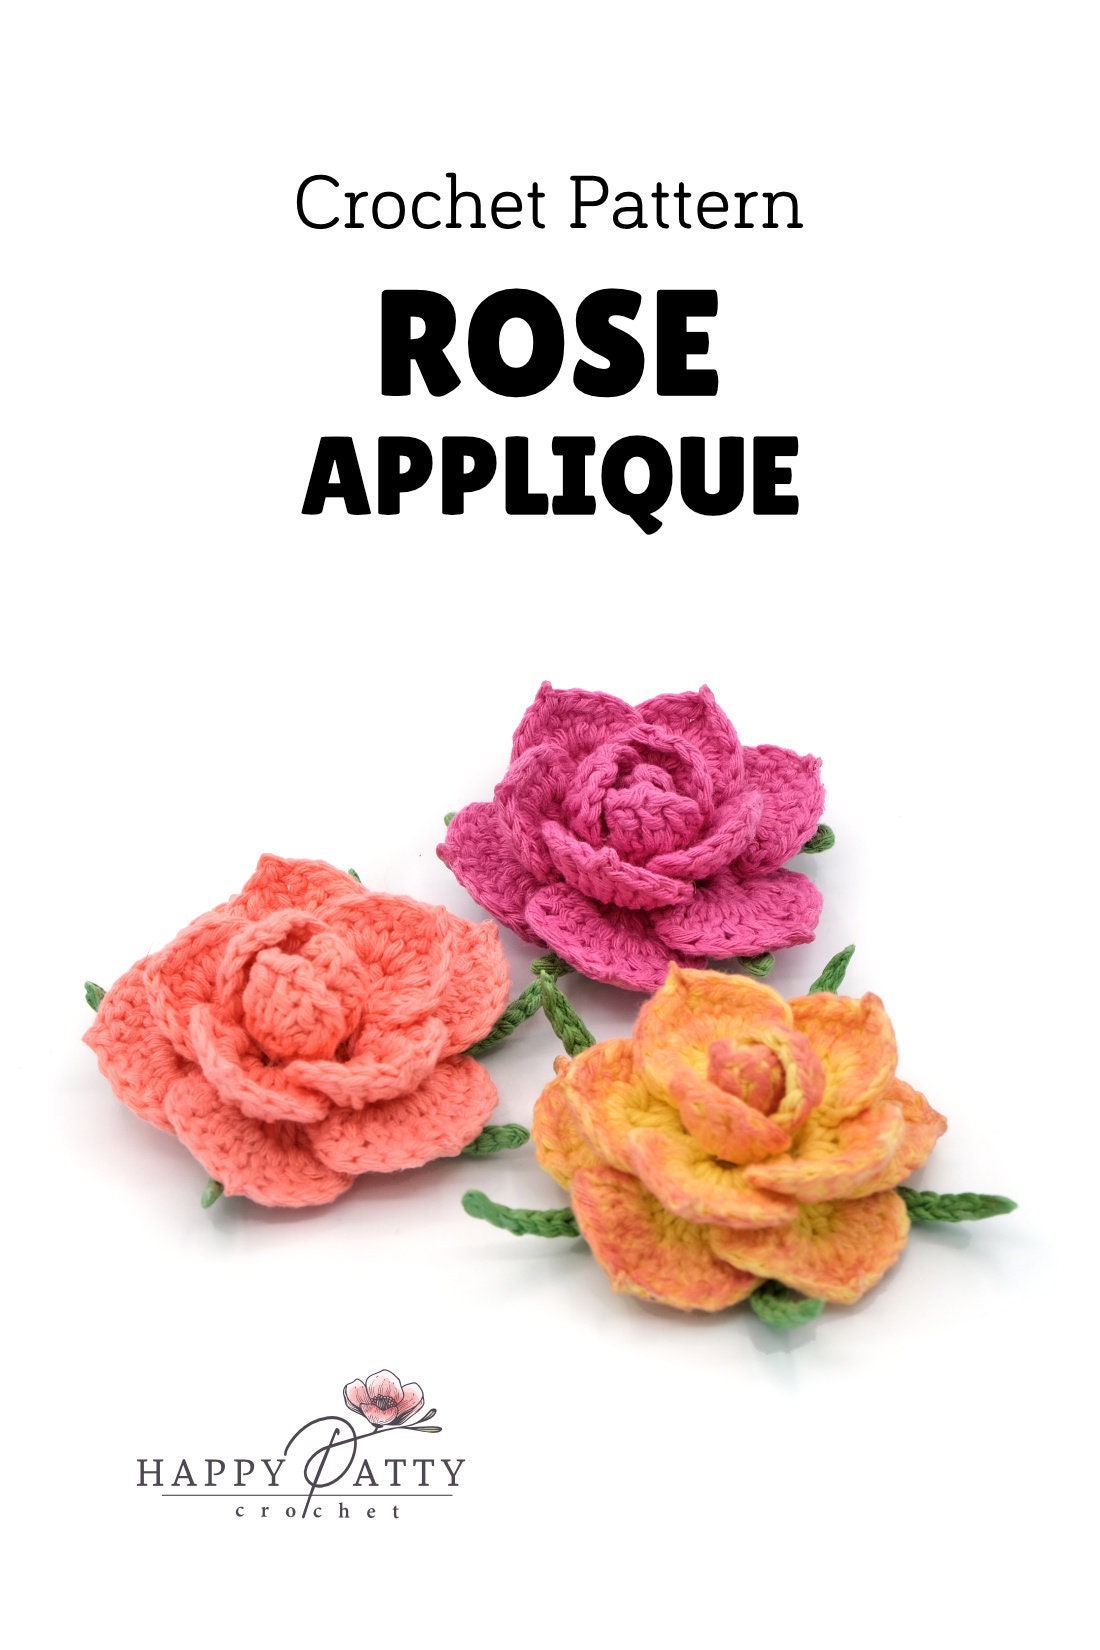 Crochet Pattern for an Easy Rose Applique - To go with a free YouTube Video Tutorial